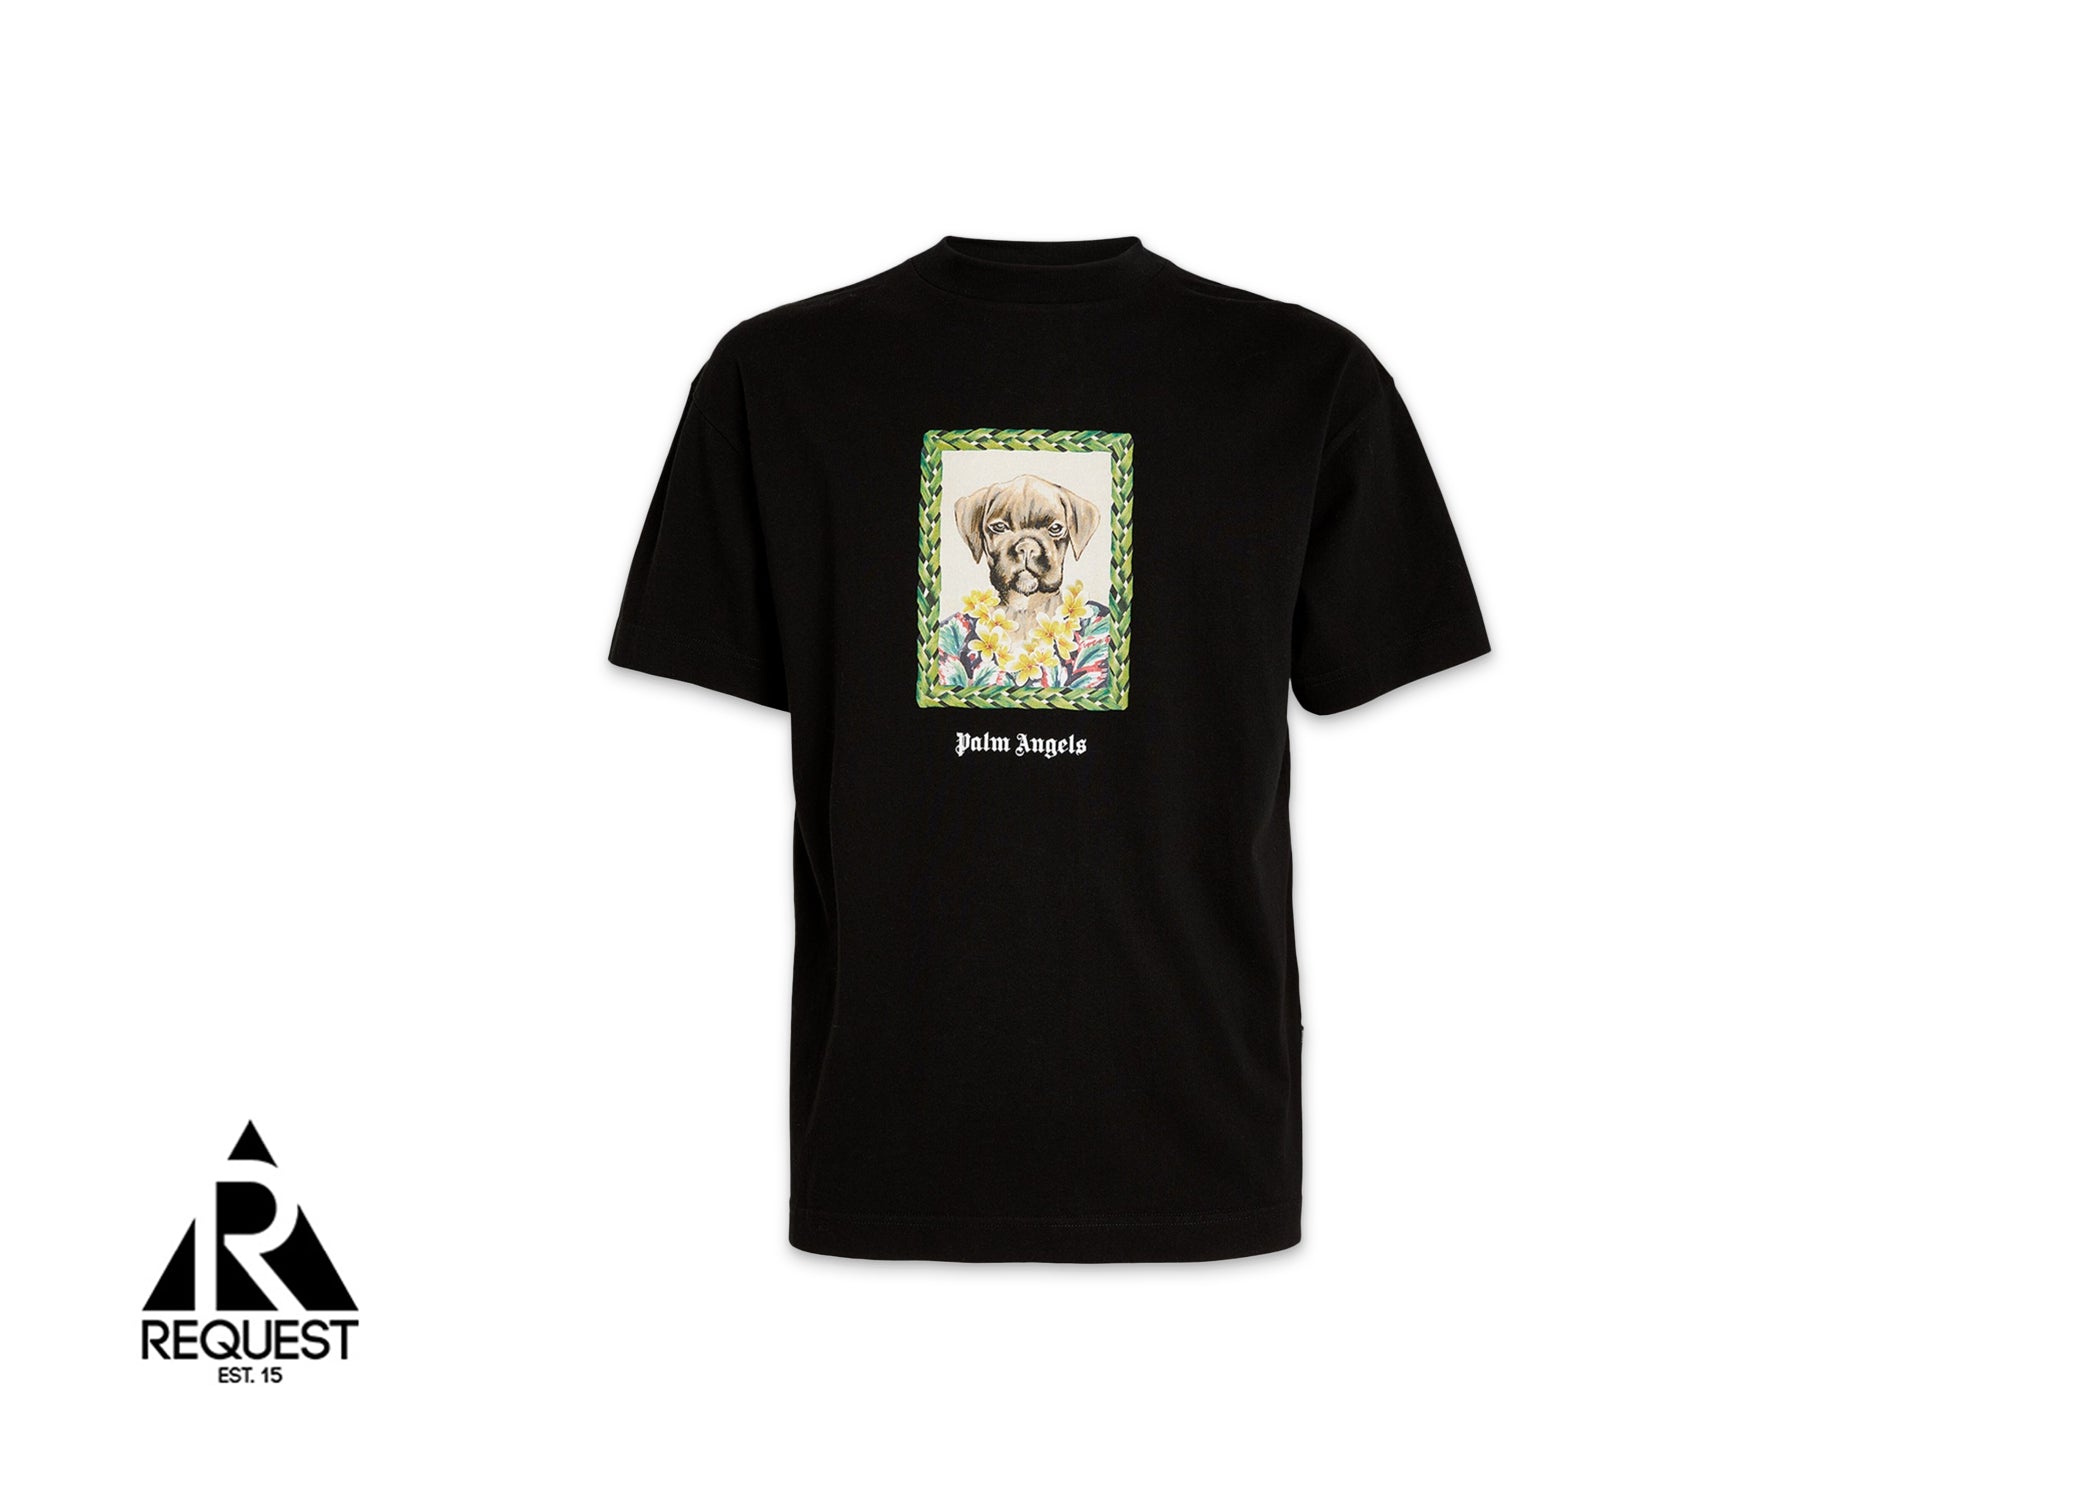 Palm Angels Boxer Classic Tee "Black/Green"